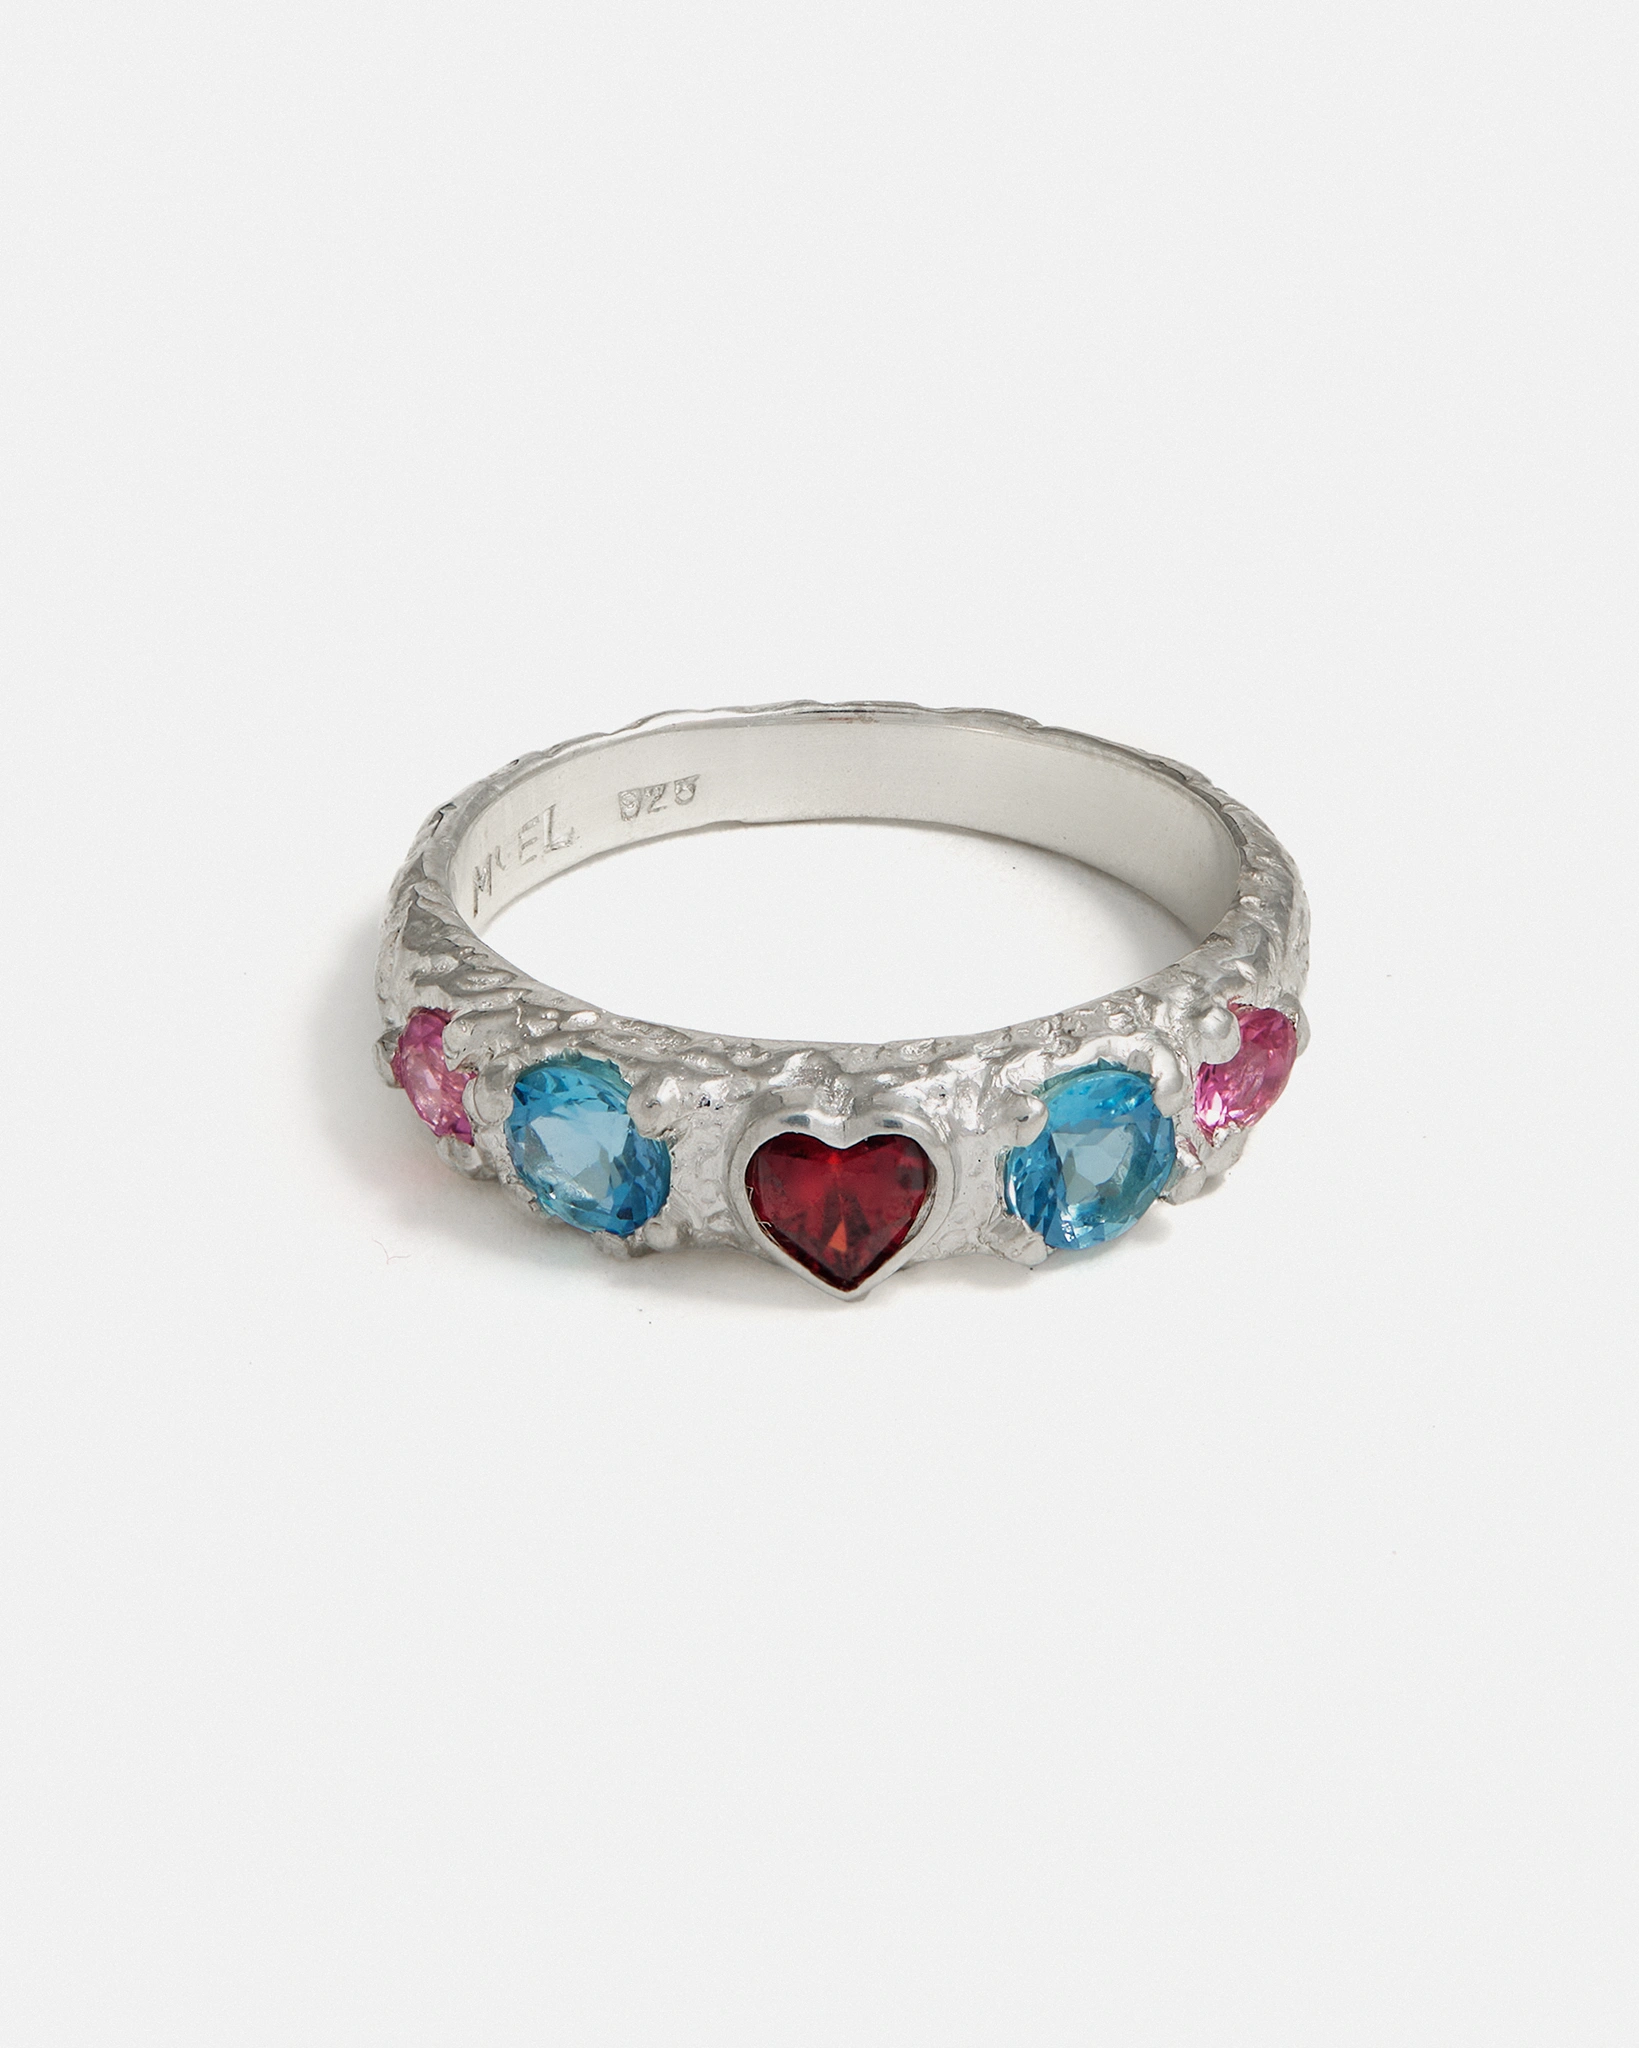 Coup de Foudre Ring in Silver with Garnet, Aquamarine and Tourmaline